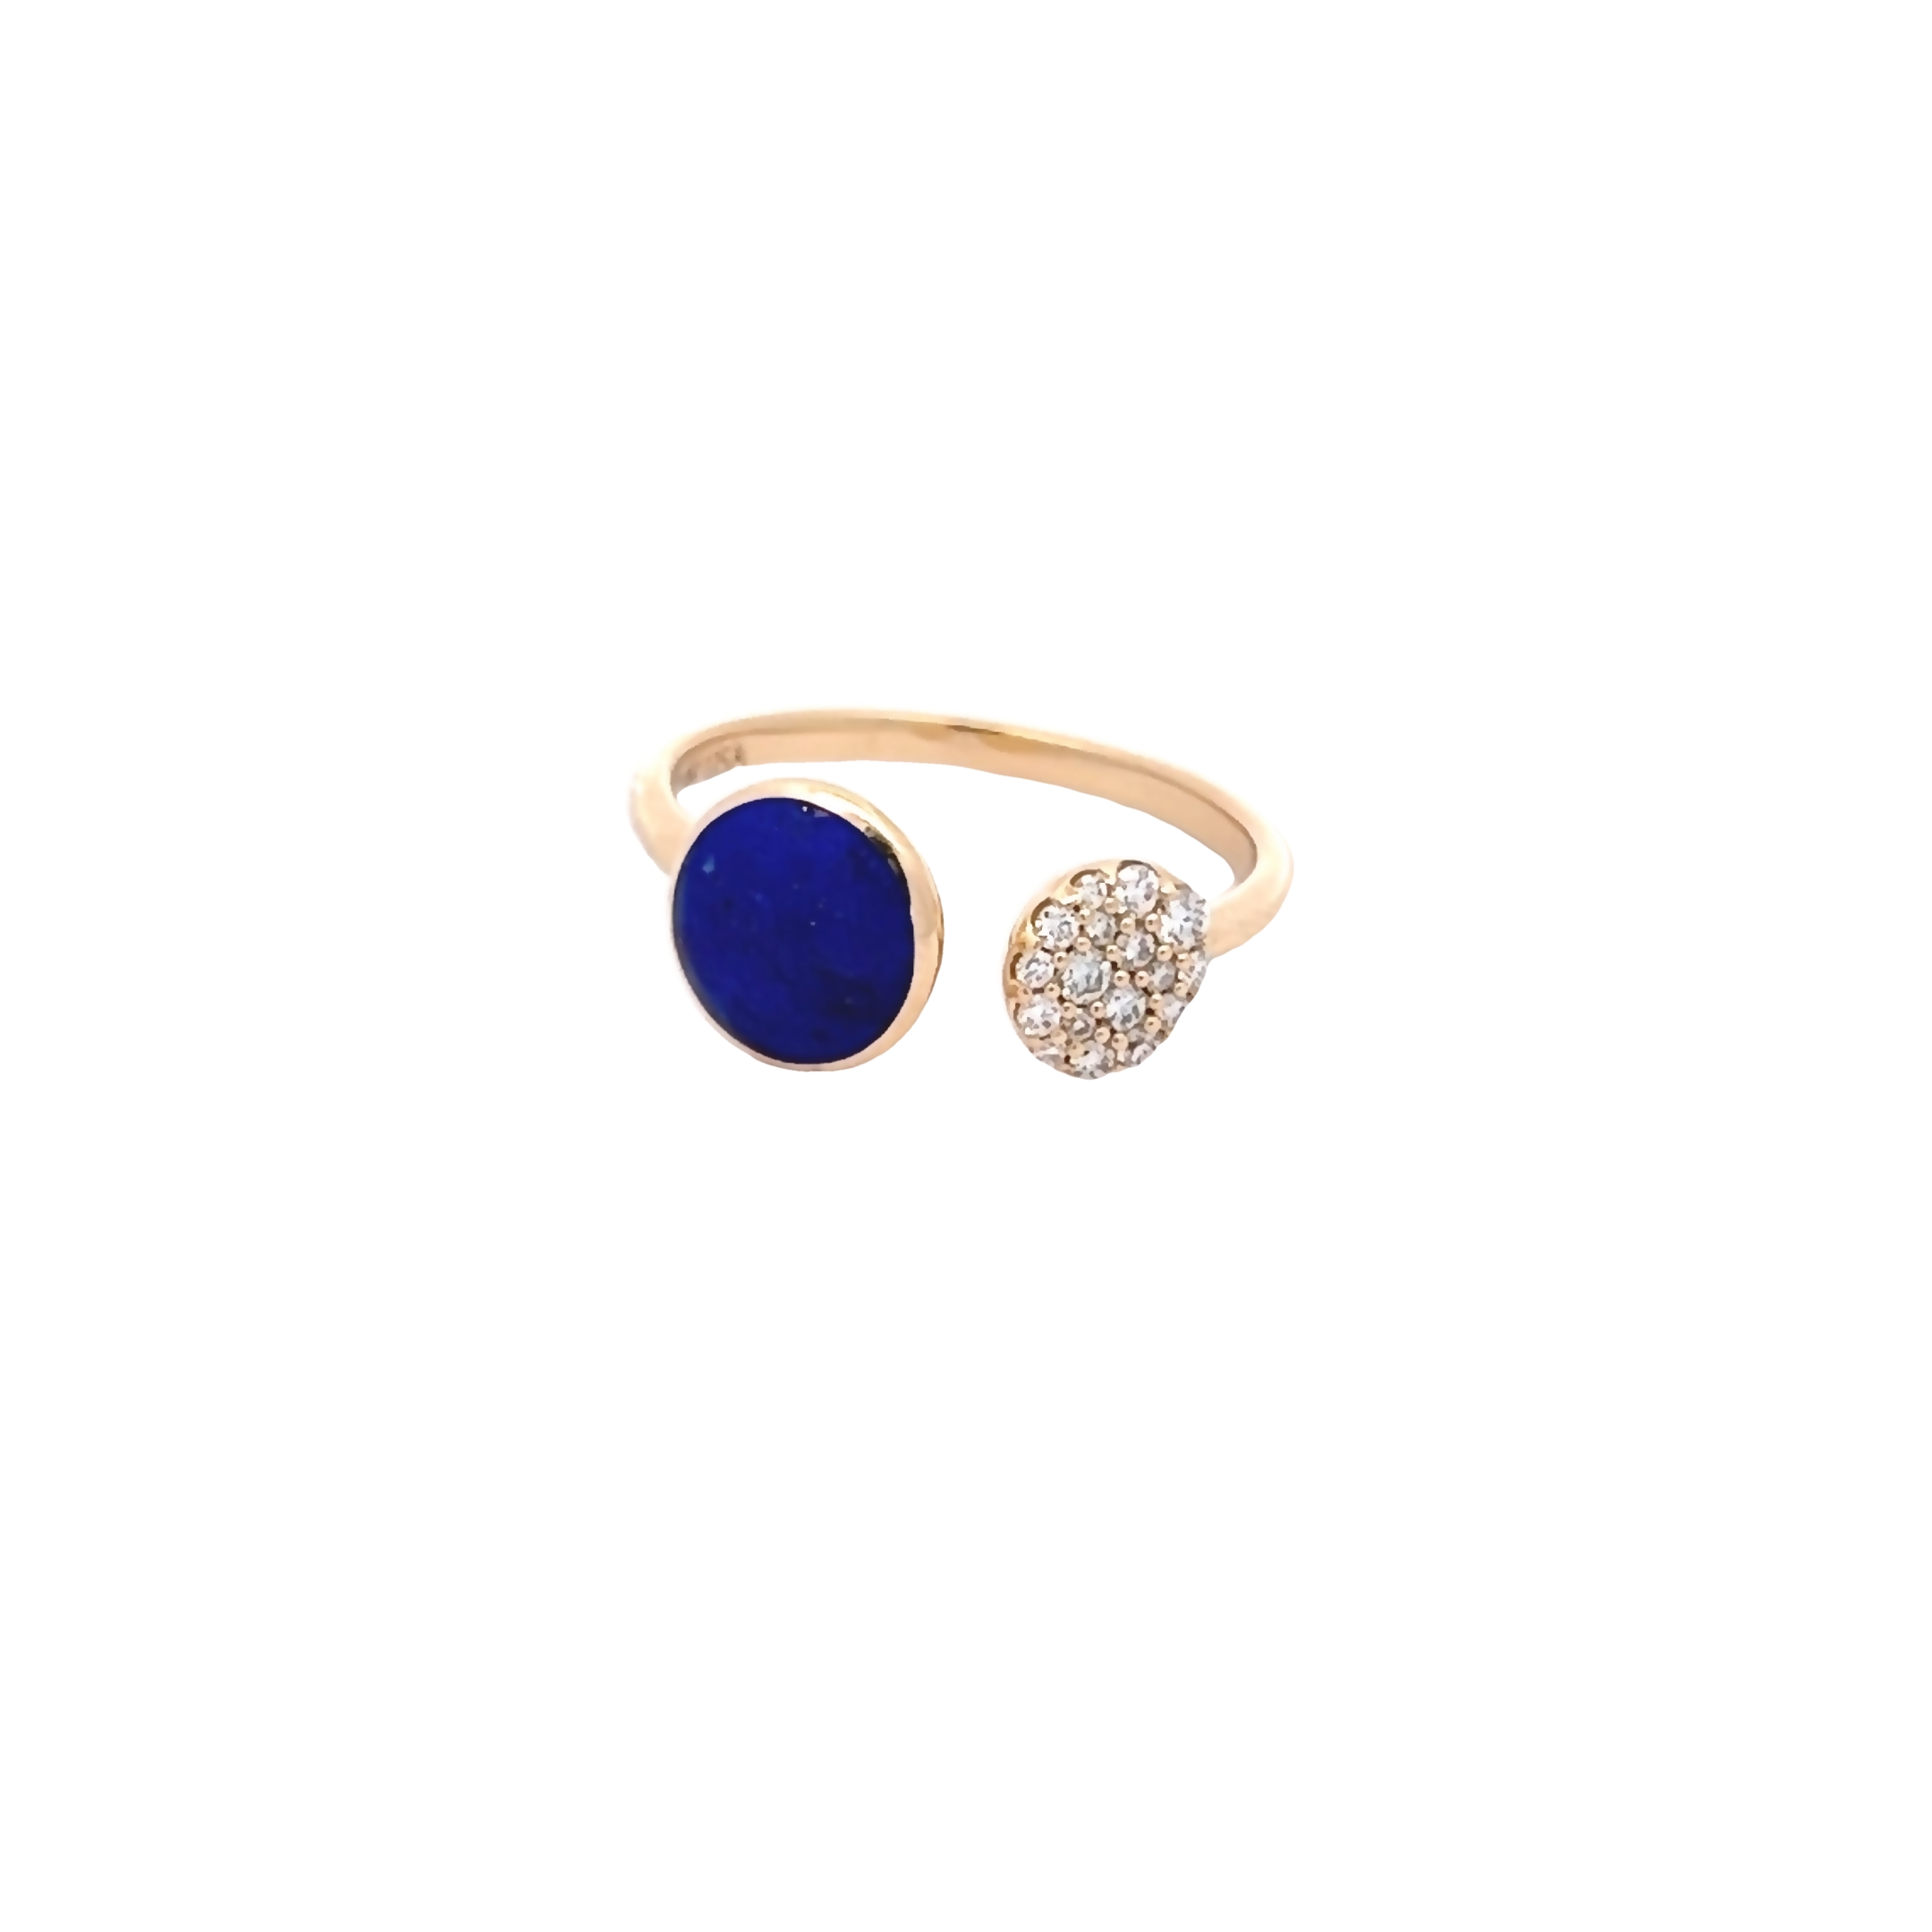 14 Karat yellow gold ring with 17=0.18 total weight round brilliant G VS Diamonds and Lapis Lazuli inlay. Size 8.